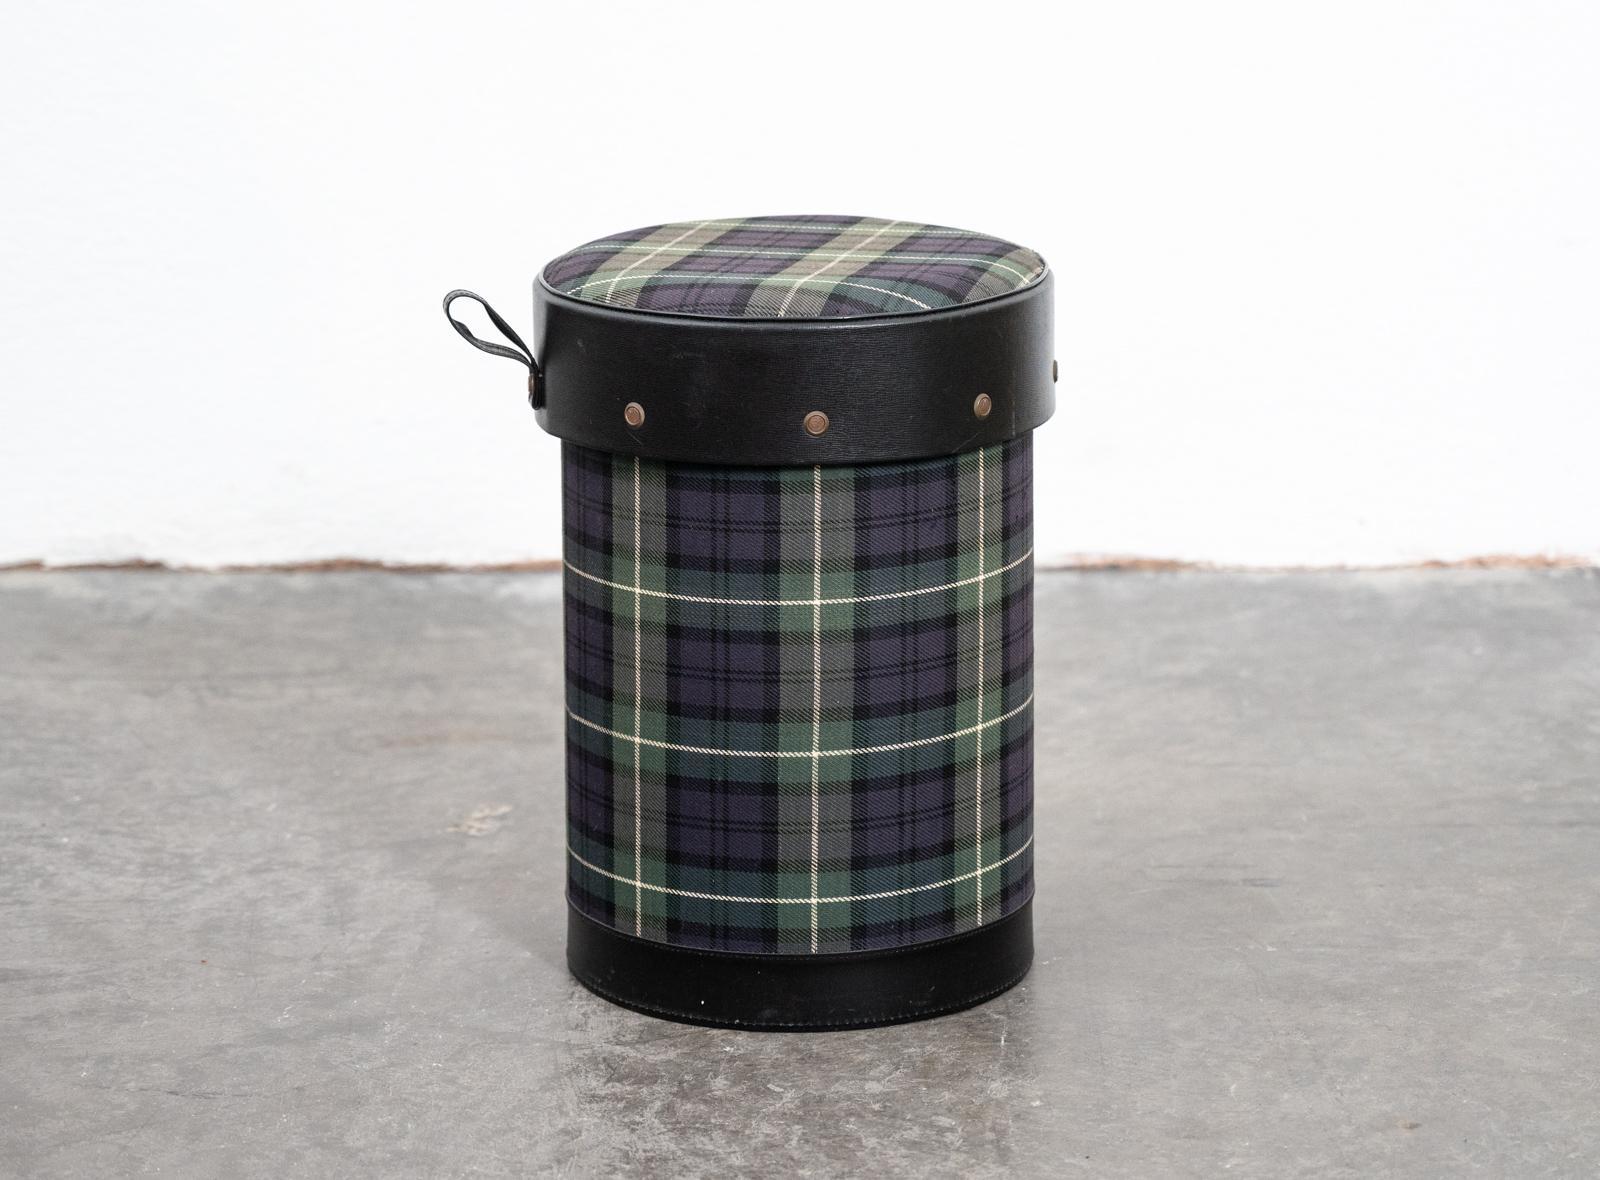 Mid century Jacques Adnet covered tartan wastepaper bin/stool, France, 1960s.